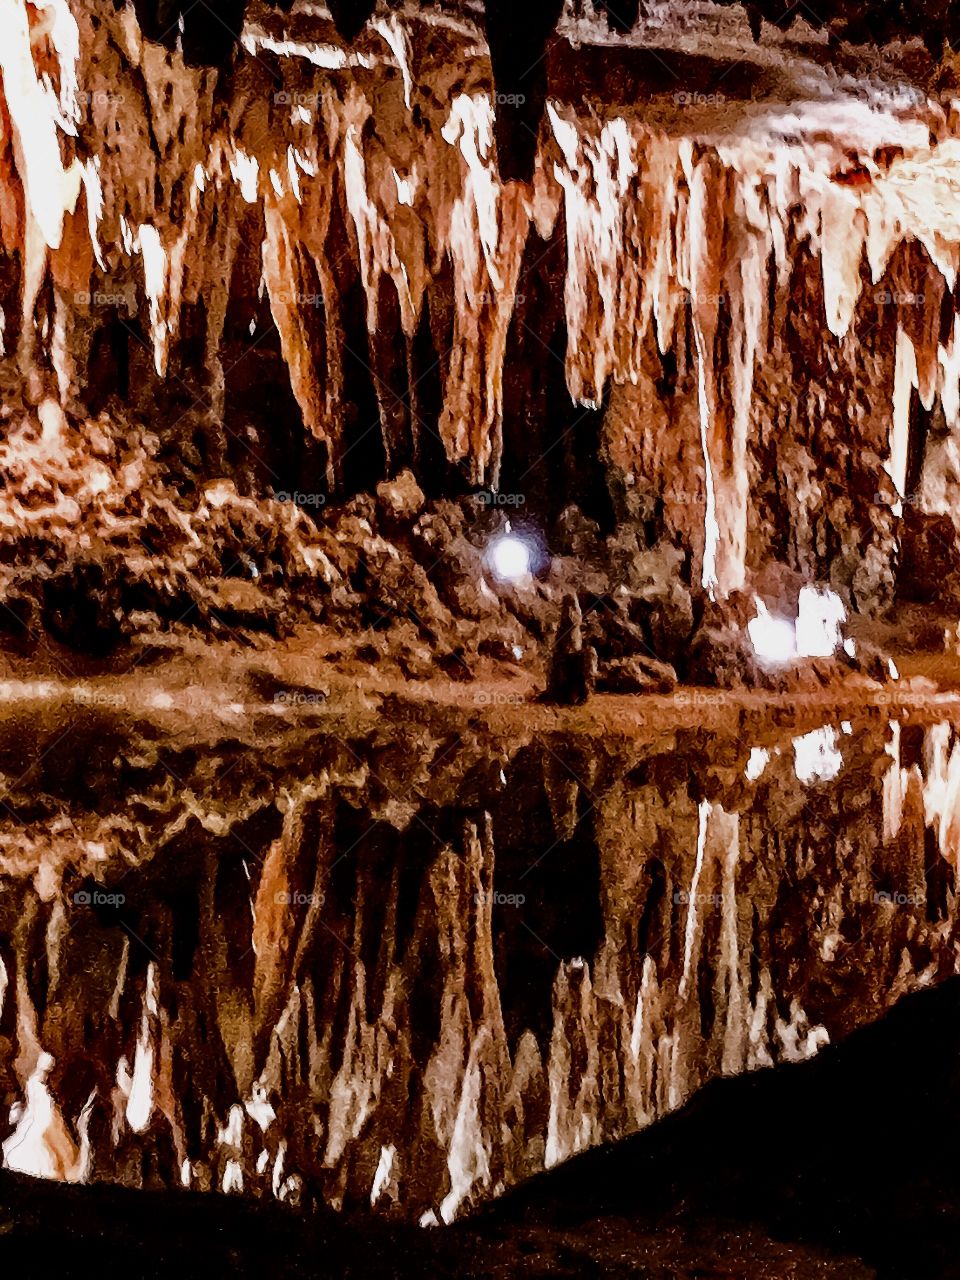 Luray cavern, USA
Beautiful reelection of natural columns deposition 
It's a beautifully designed and decorated by Mother Nature over period of many millions years. Natural deposition of speleothems such as columns, mud flows, stalactites, stalagmites, flowstone are beautifully mirrored on water surface.